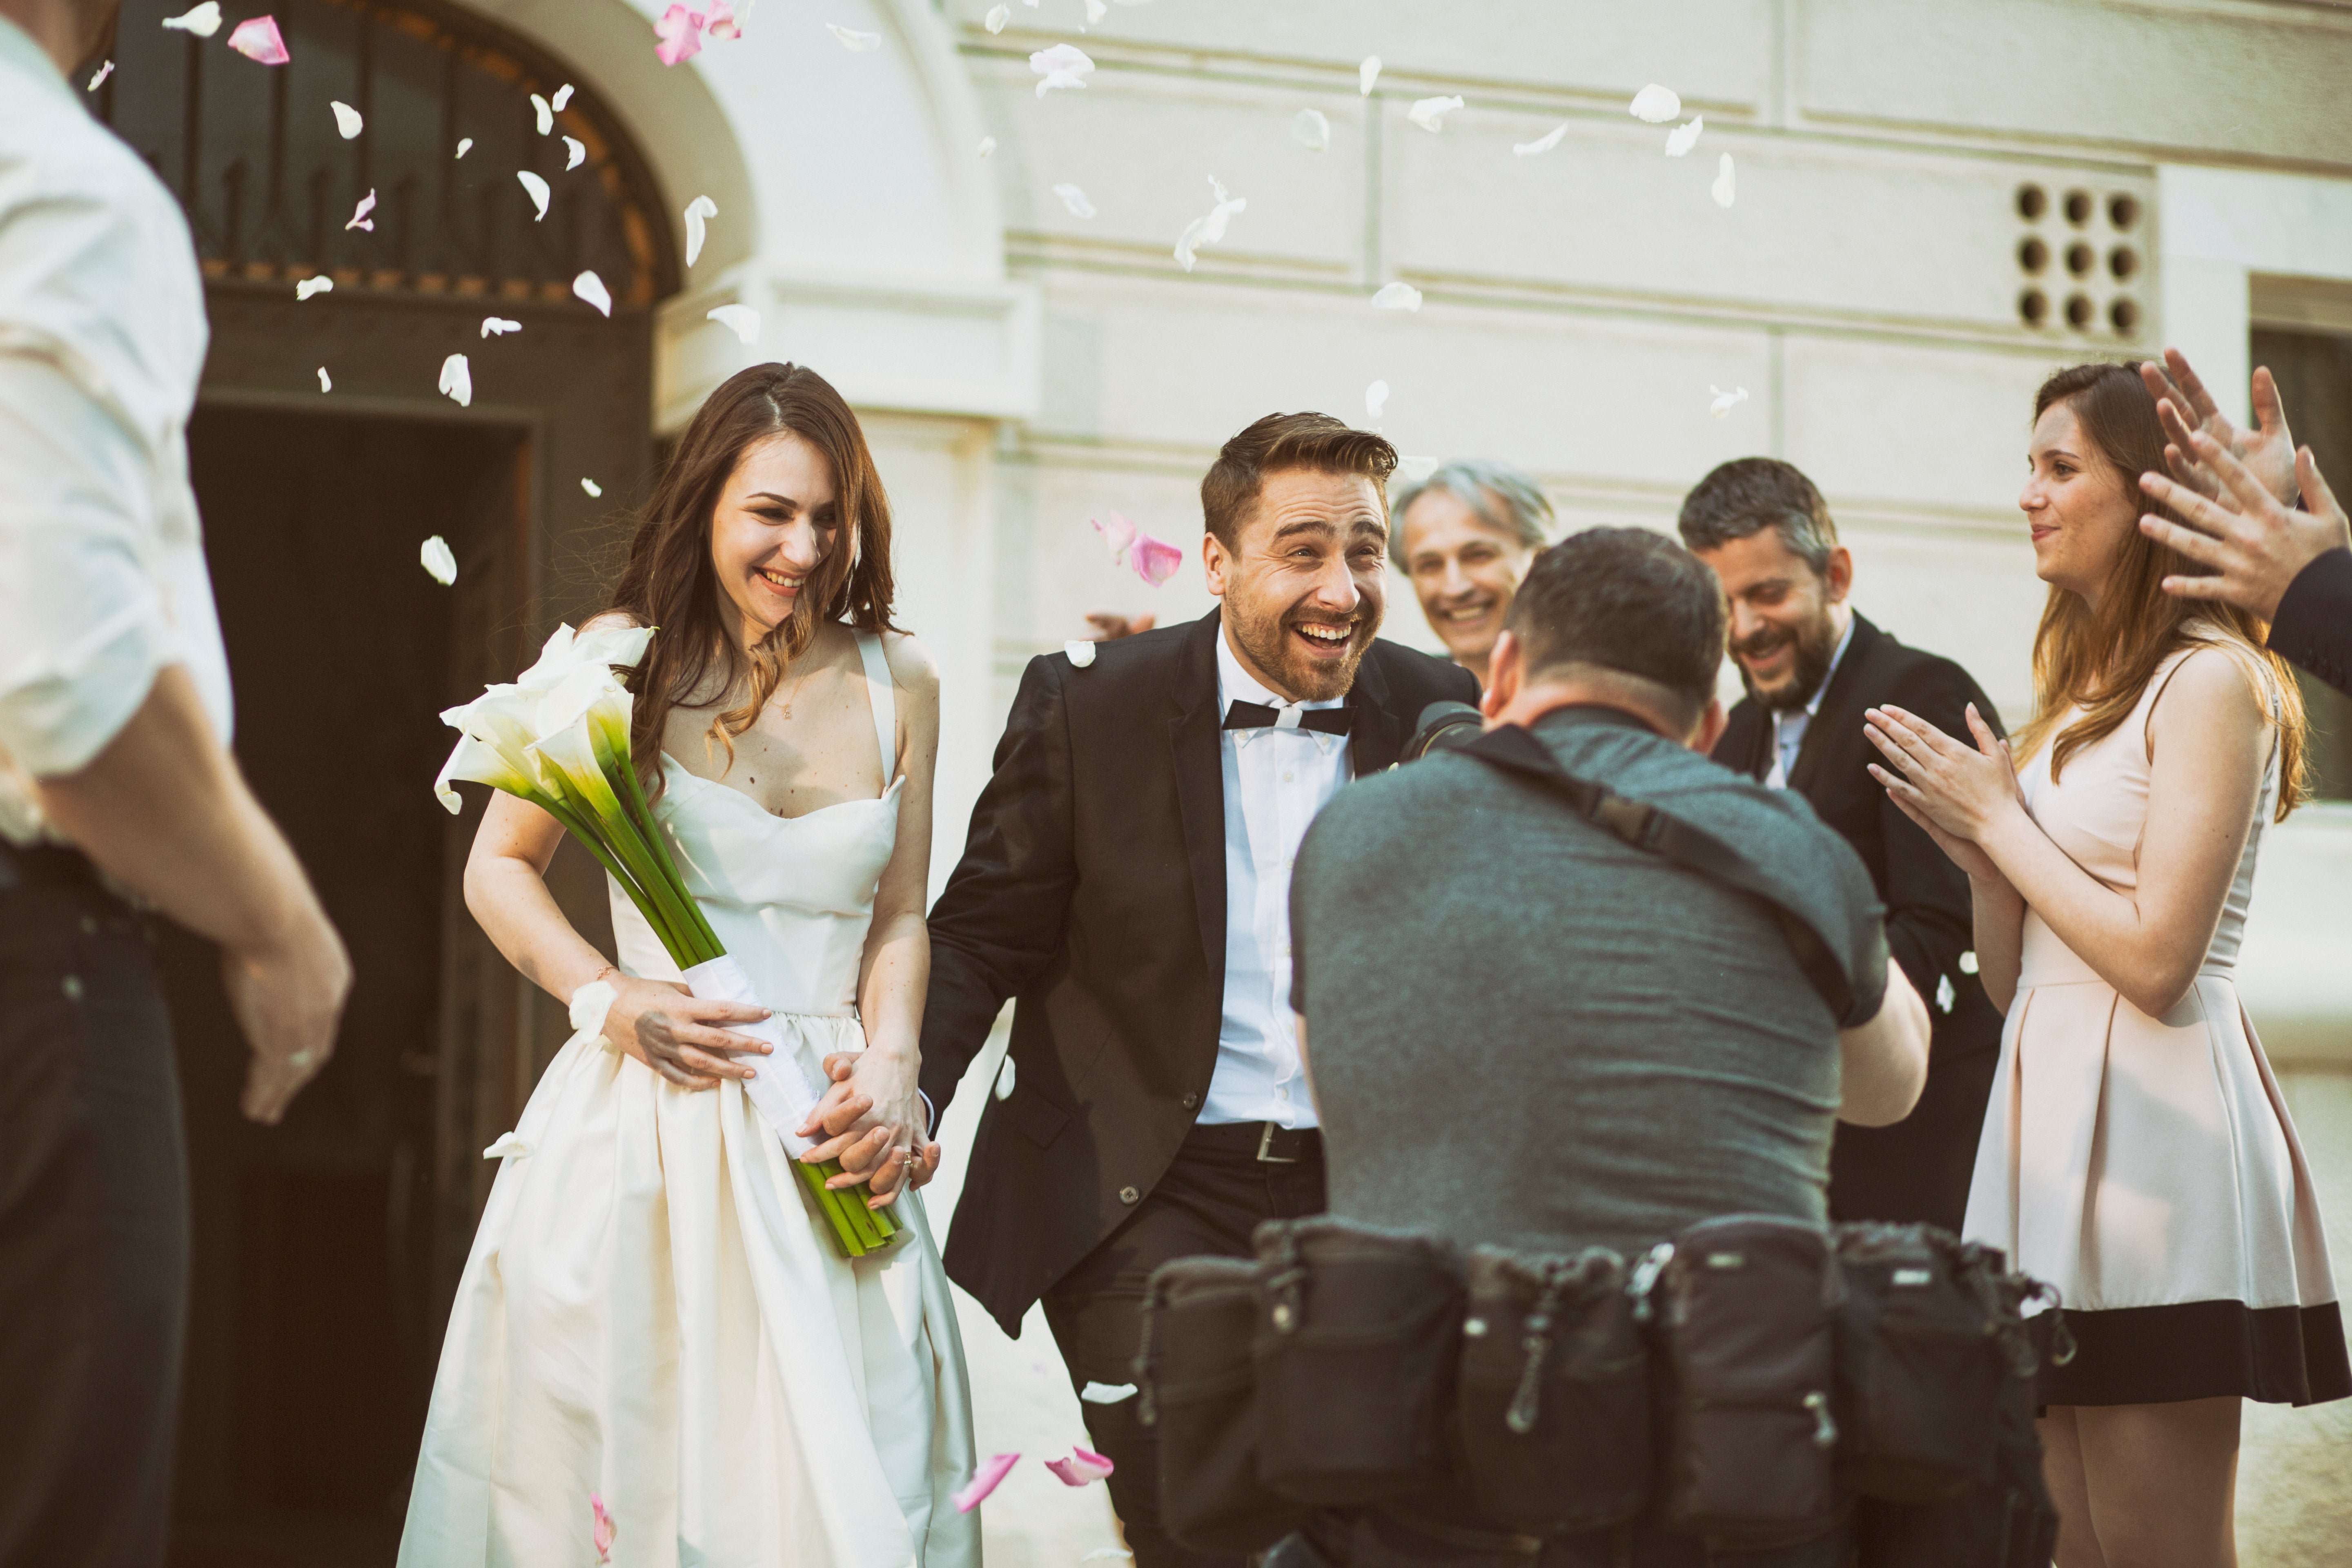 Conflict: photographers and church leaders may have very different priorities on the big day